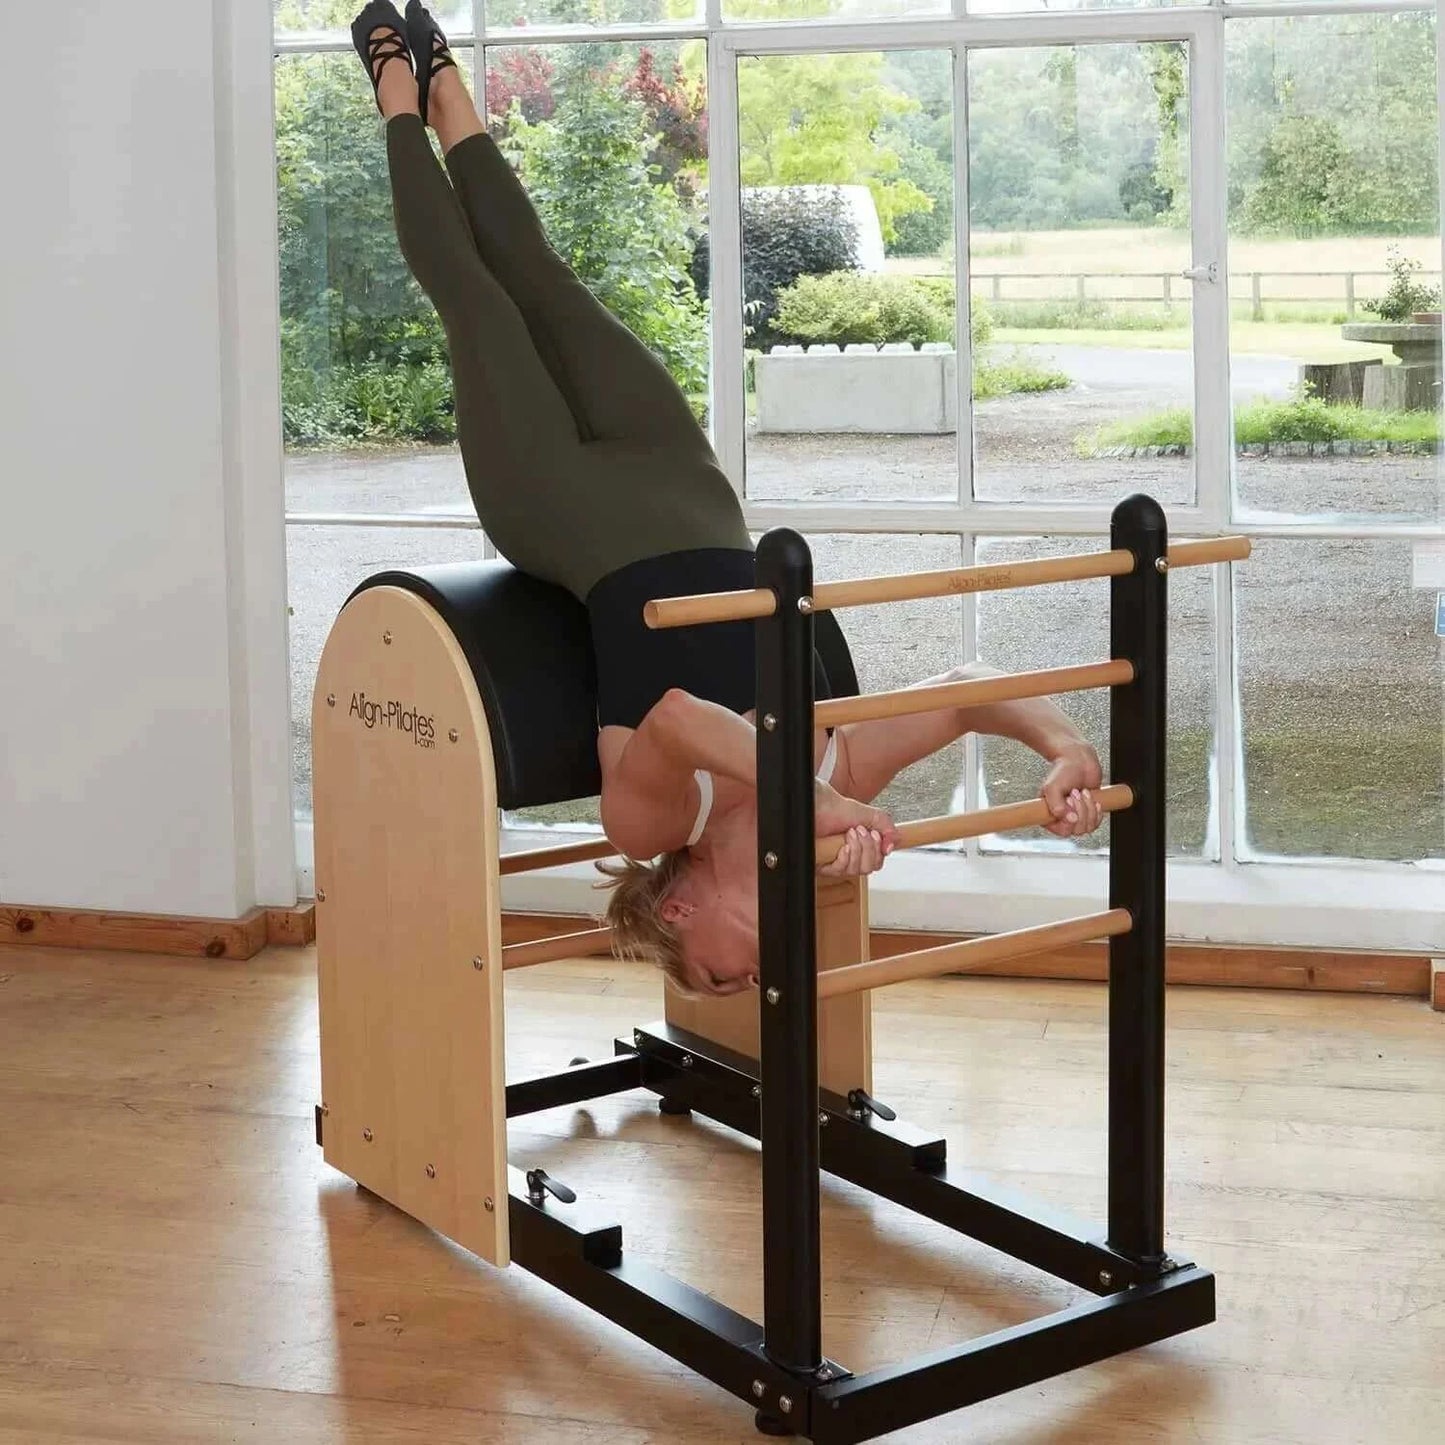  Align Pilates Ladder Barrel RC by Align Pilates sold by Pilates Matters® by BSP LLC